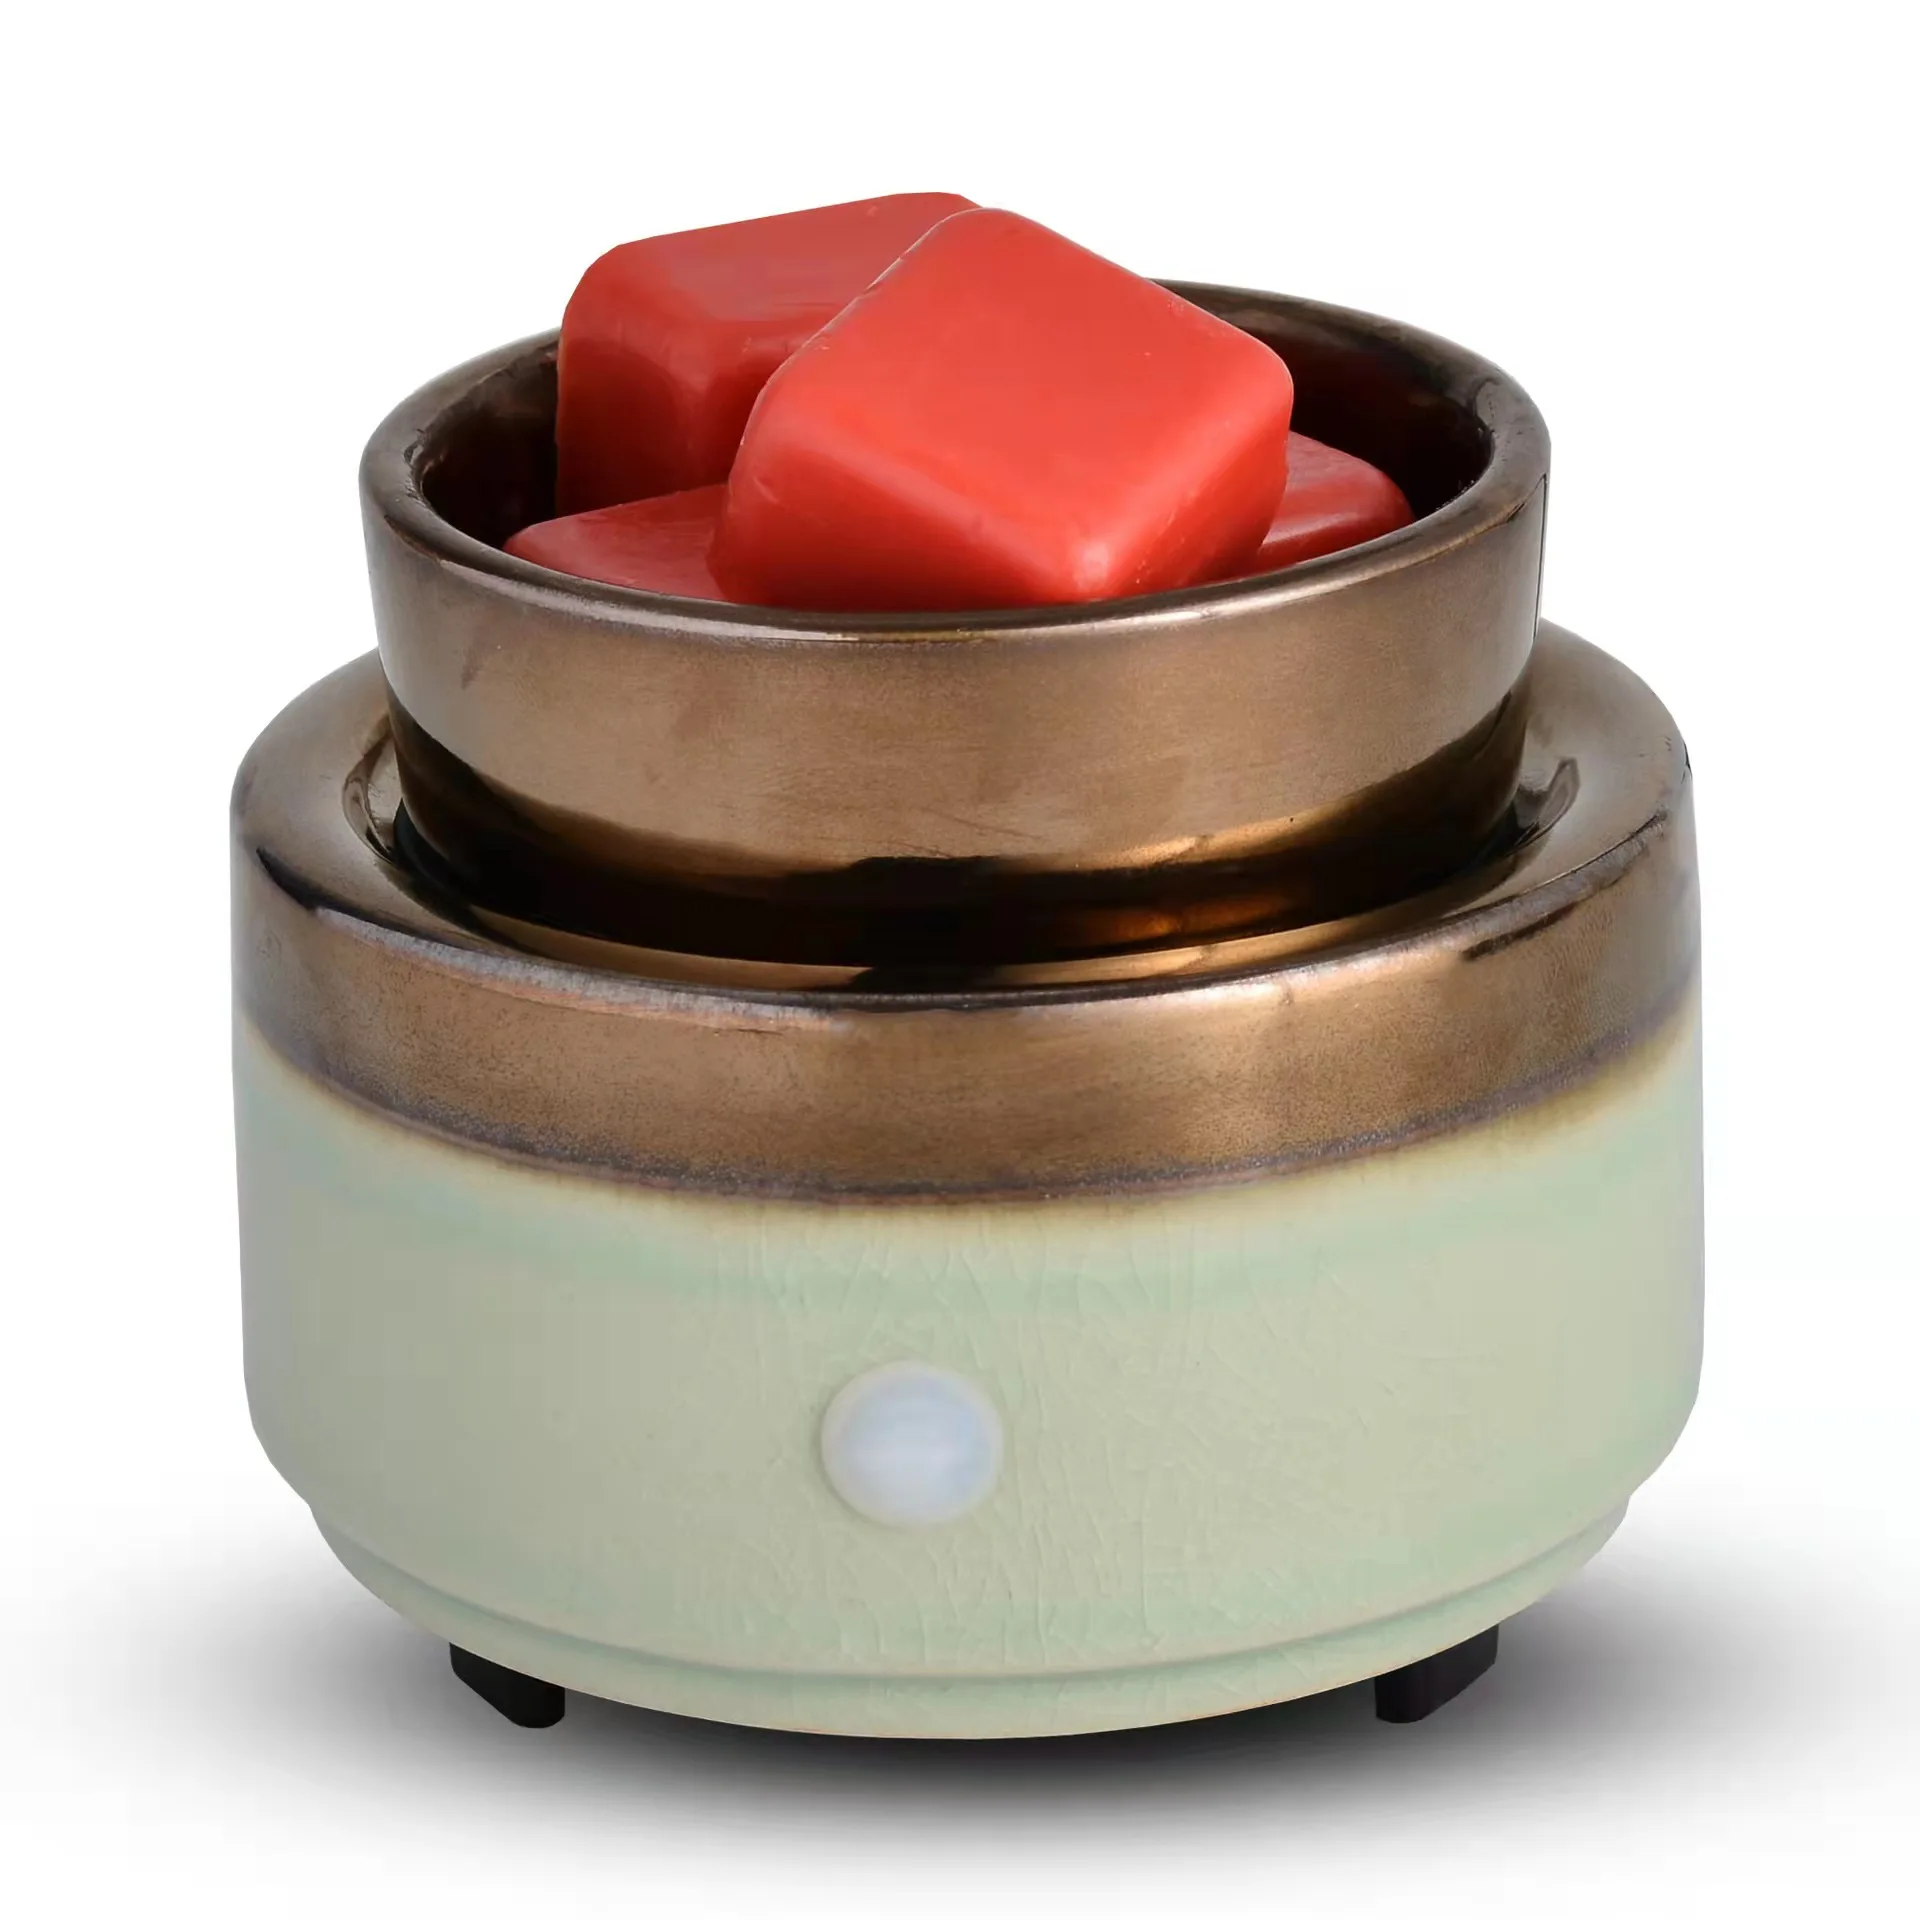 Ceramic Wax Melt Warmer Scentsy Warmer 2-in-1 Candle Wax Melter